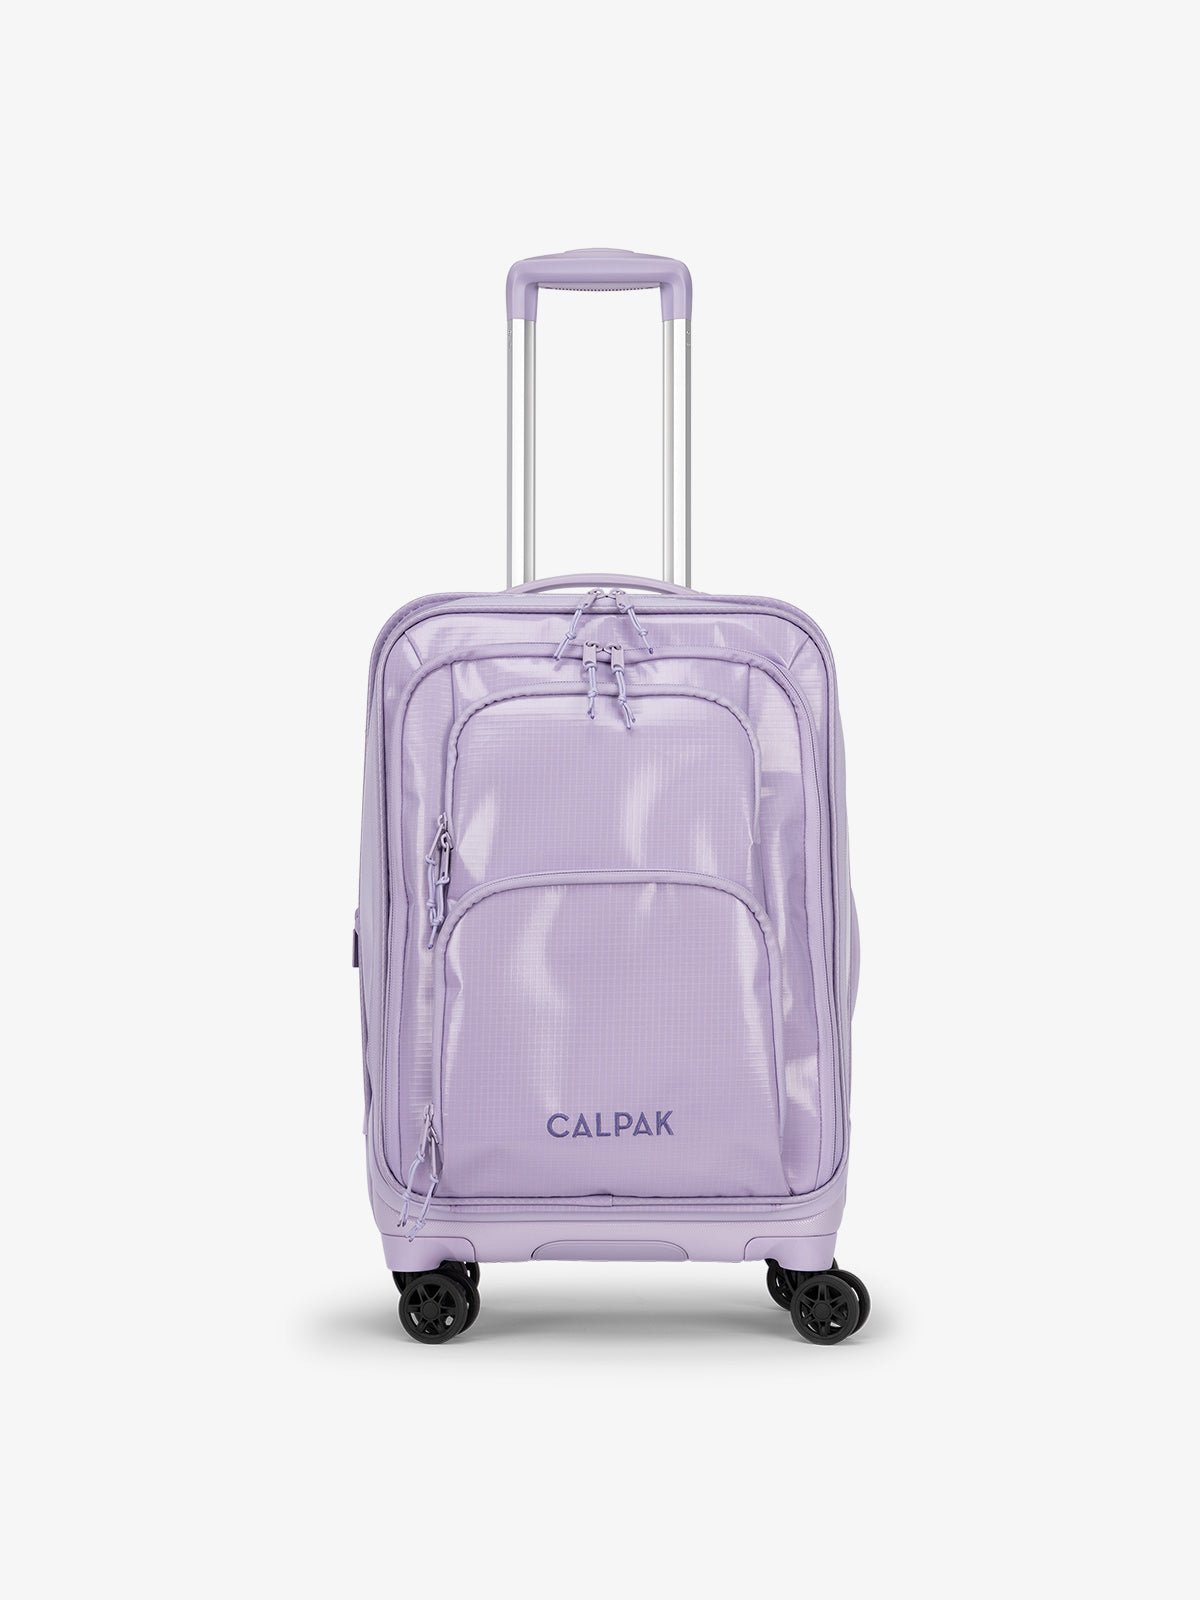 CALPAK Terra Carry-On Luggage soft shell view with 360 spinner wheels in amethyst